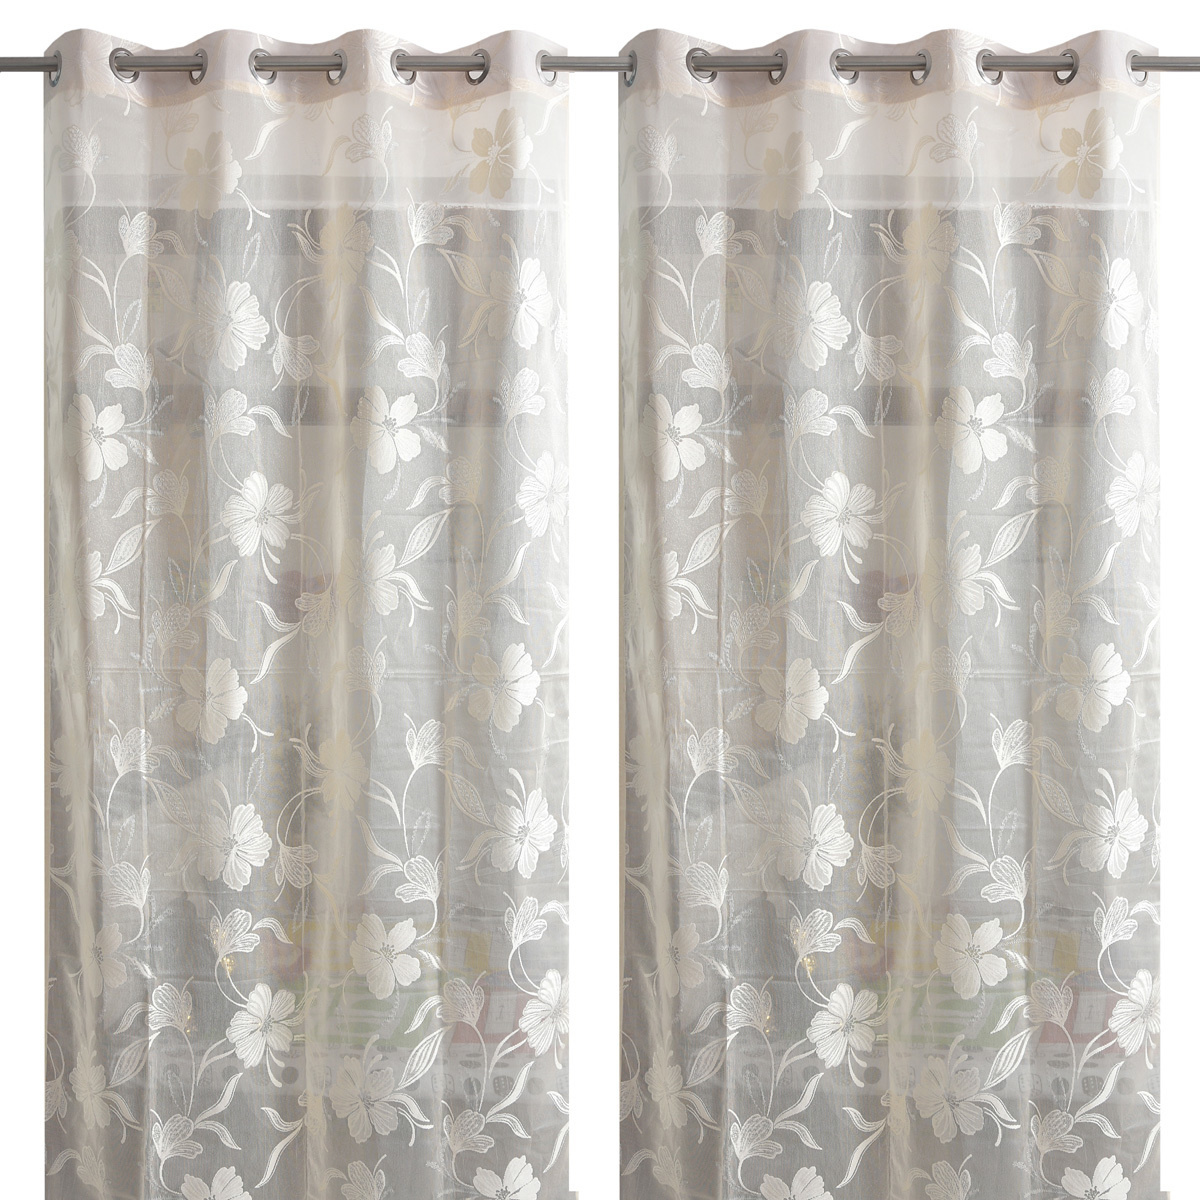 HANDTEX HOME Cream Sheer Net Curtains With Beautiful Embroidered Floral